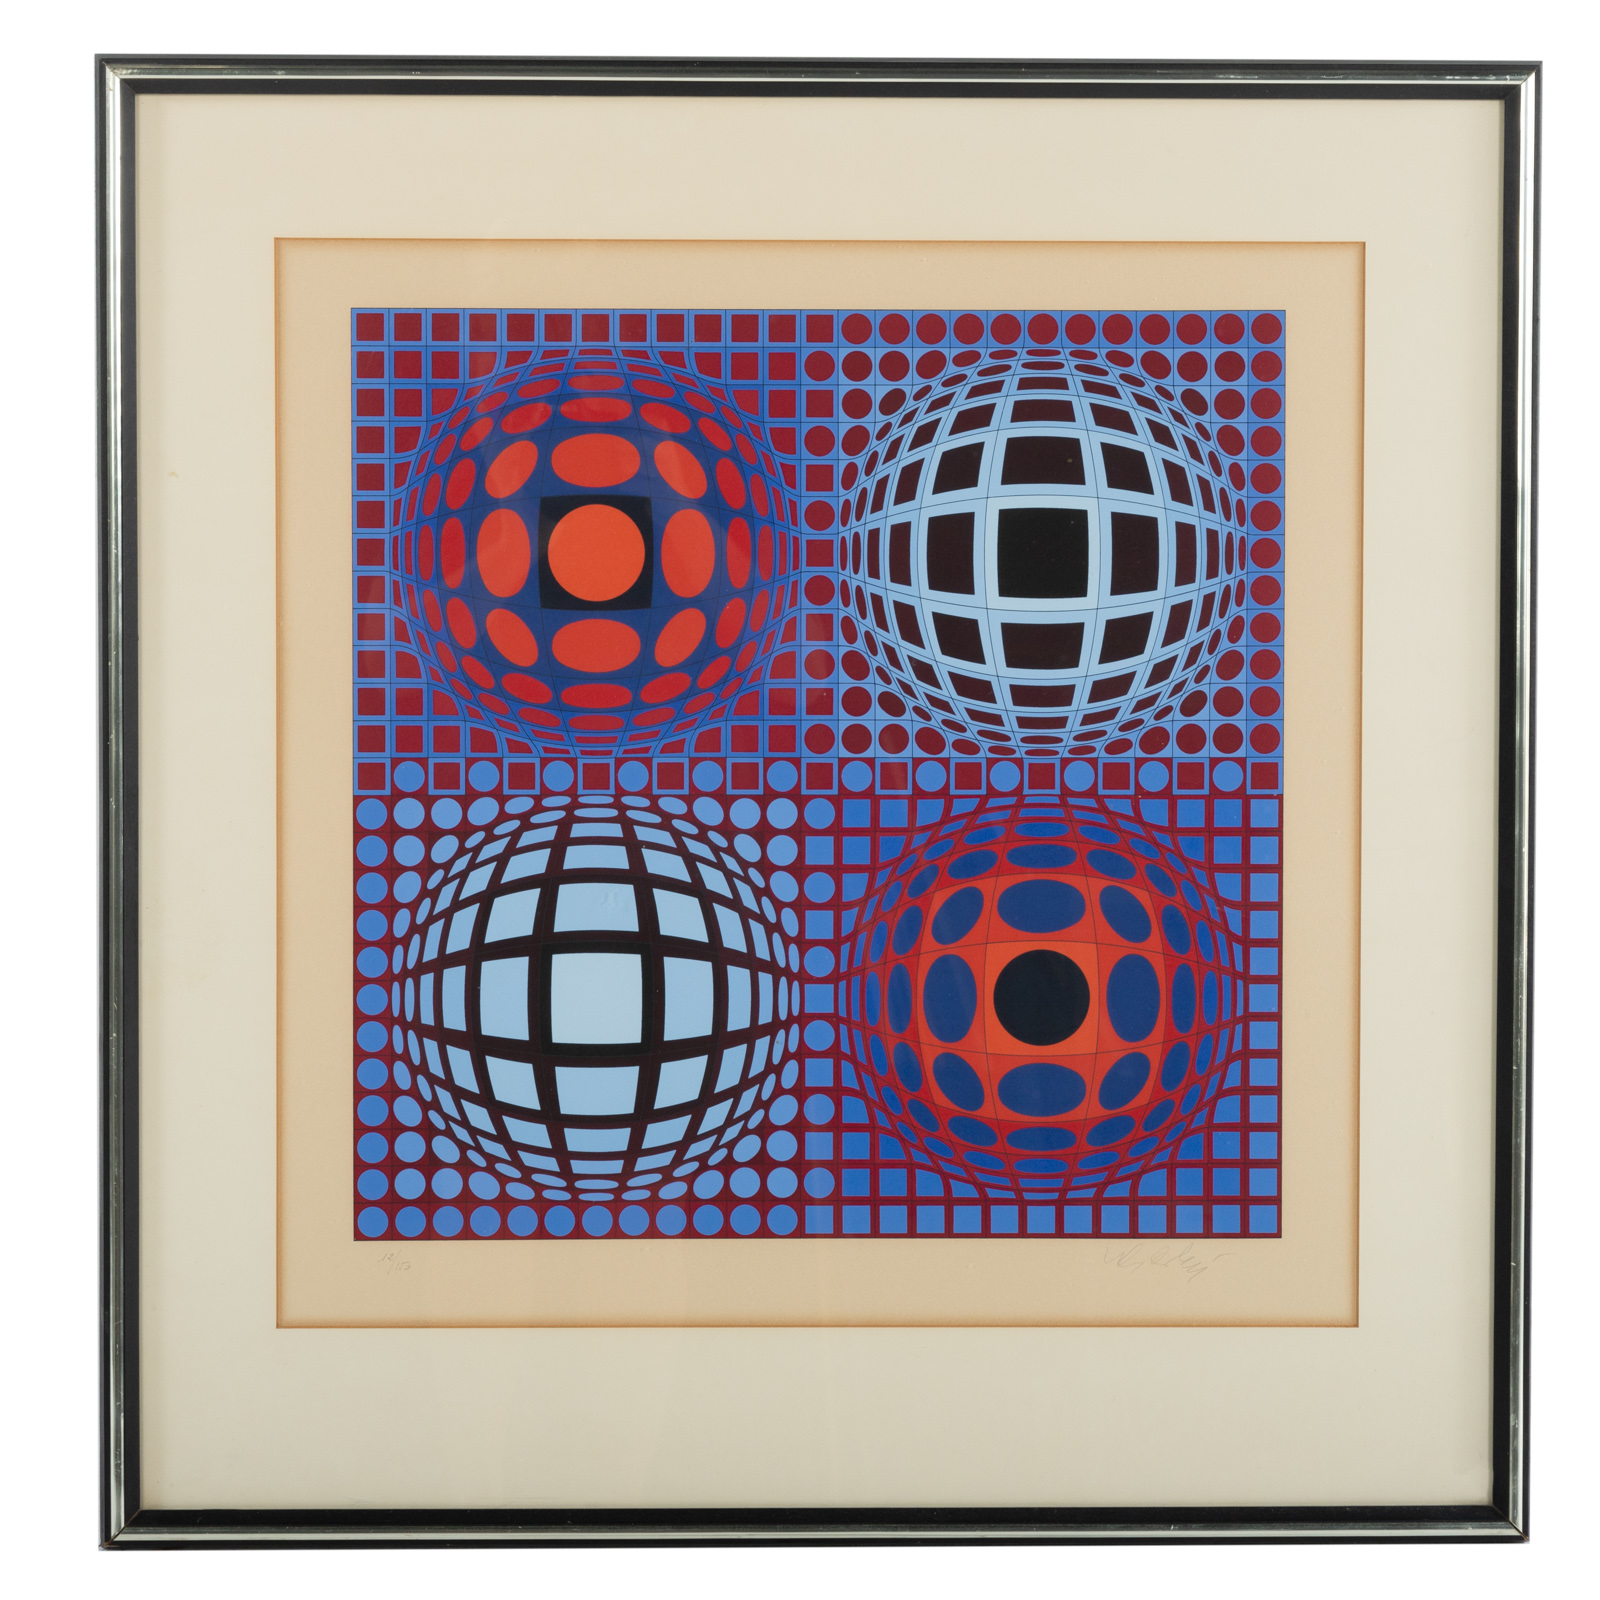 VICTOR VASARELY ABSTRACT IN RED 36a81d